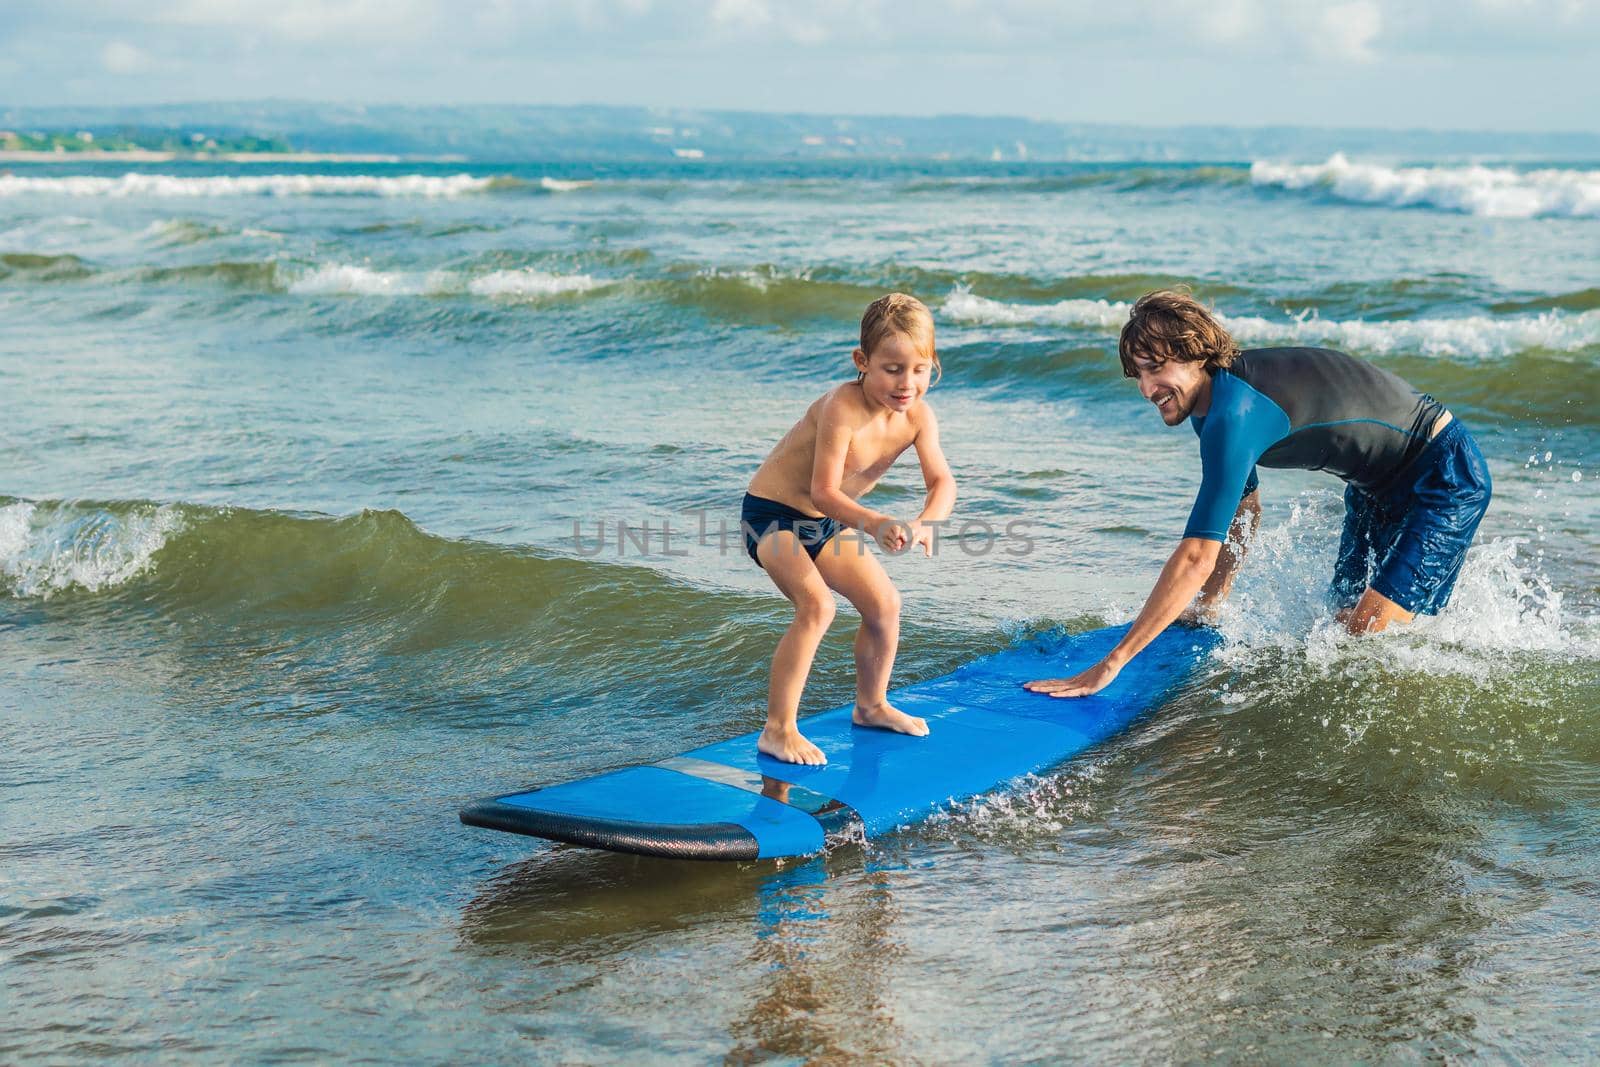 Father or instructor teaching his 4 year old son how to surf in the sea on vacation or holiday. Travel and sports with children concept. Surfing lesson for kids.